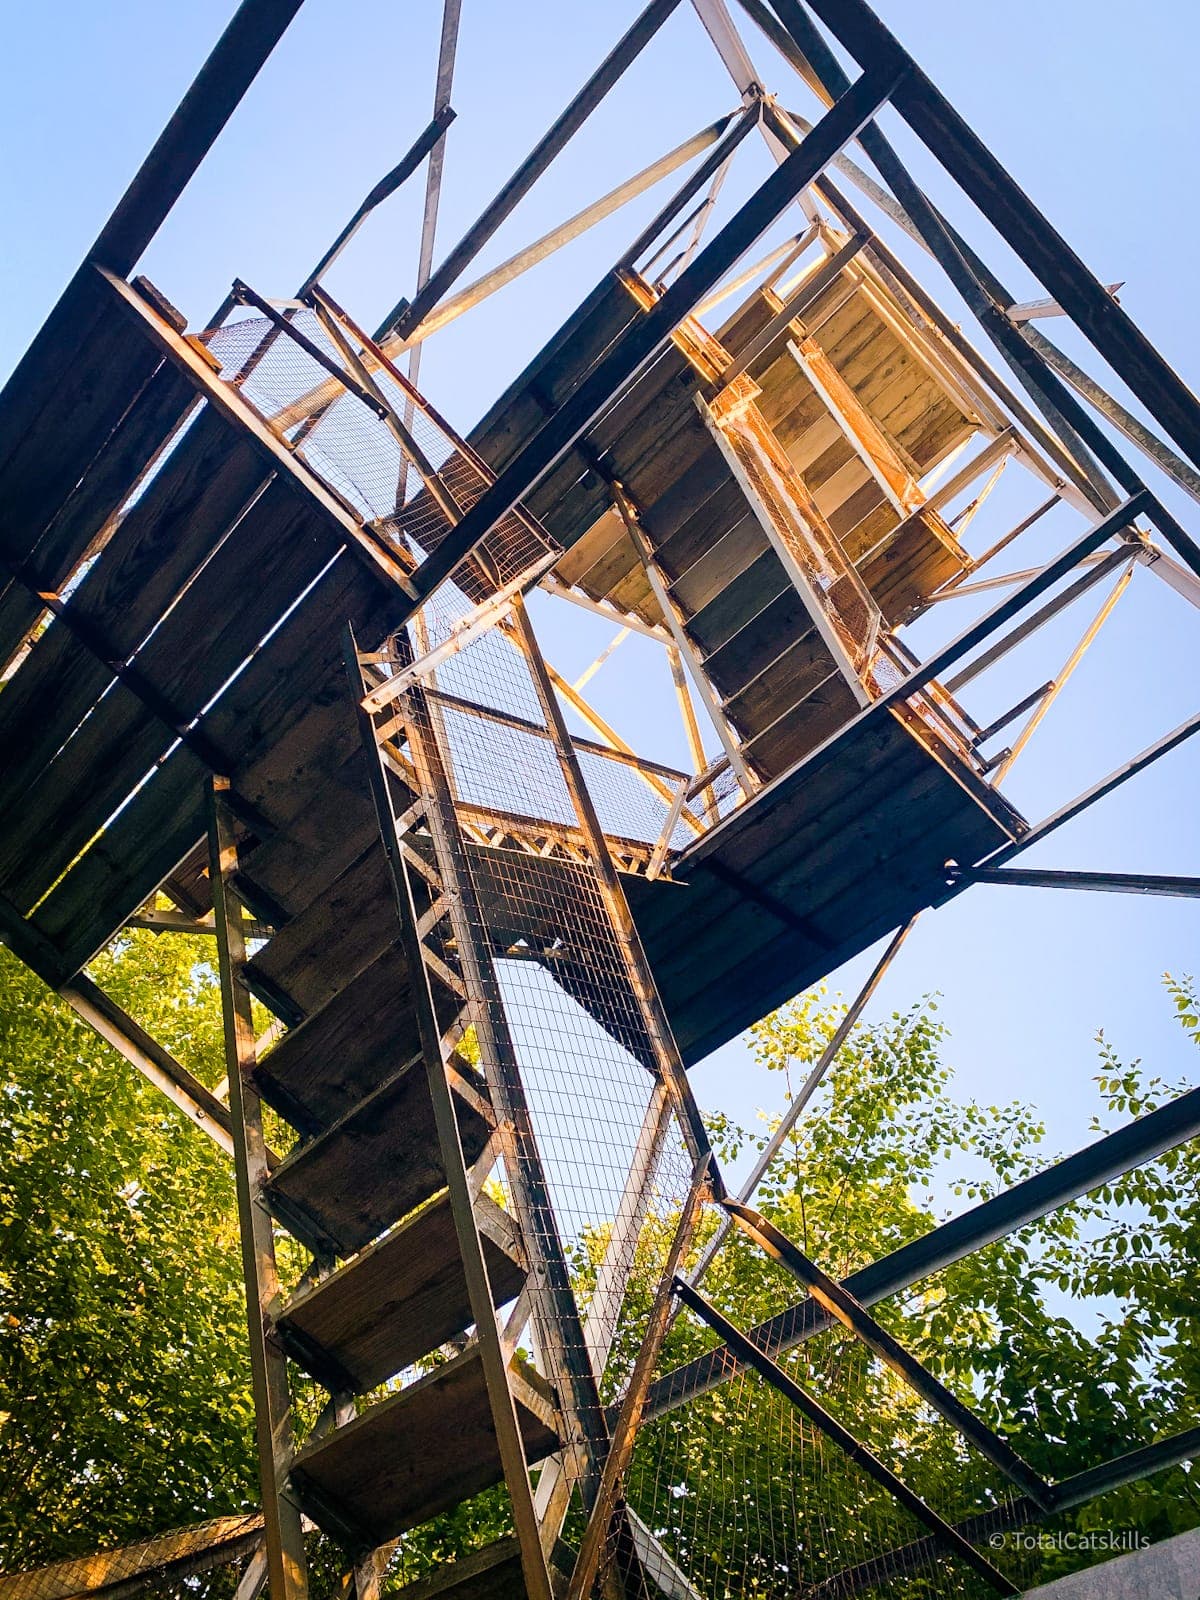 fire tower seen from the bottom